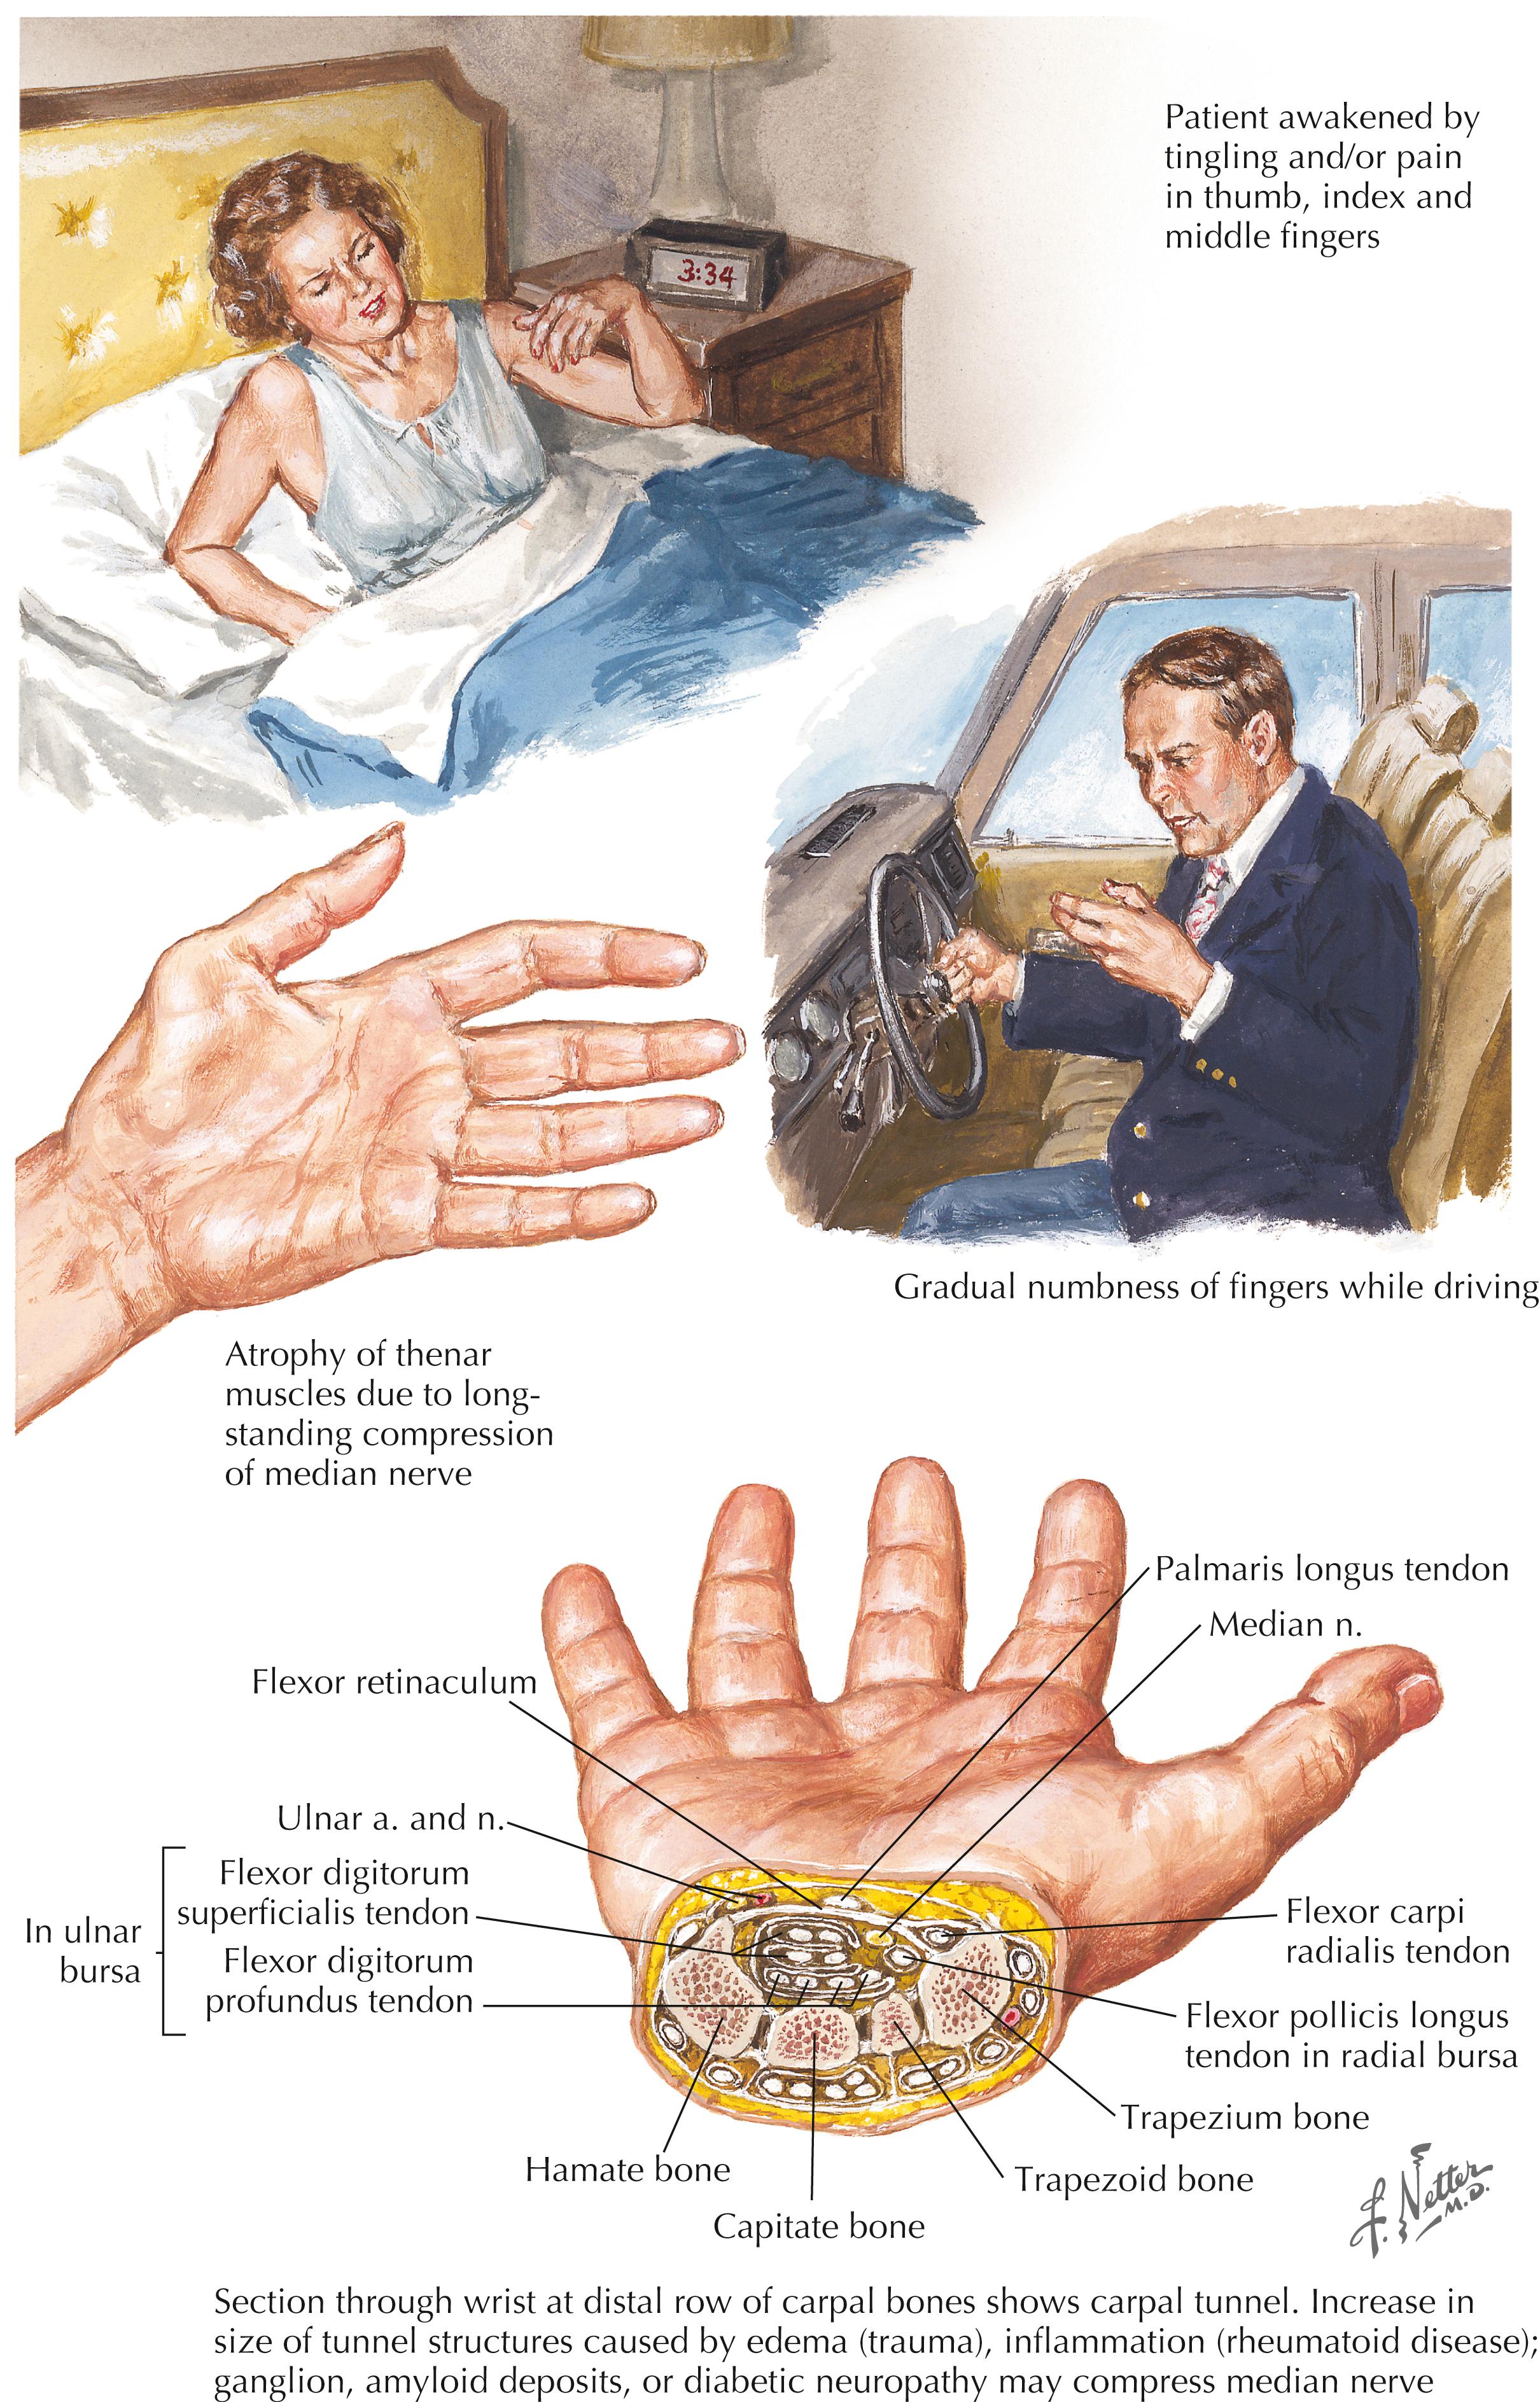 Figure 11-14, Carpal tunnel syndrome.